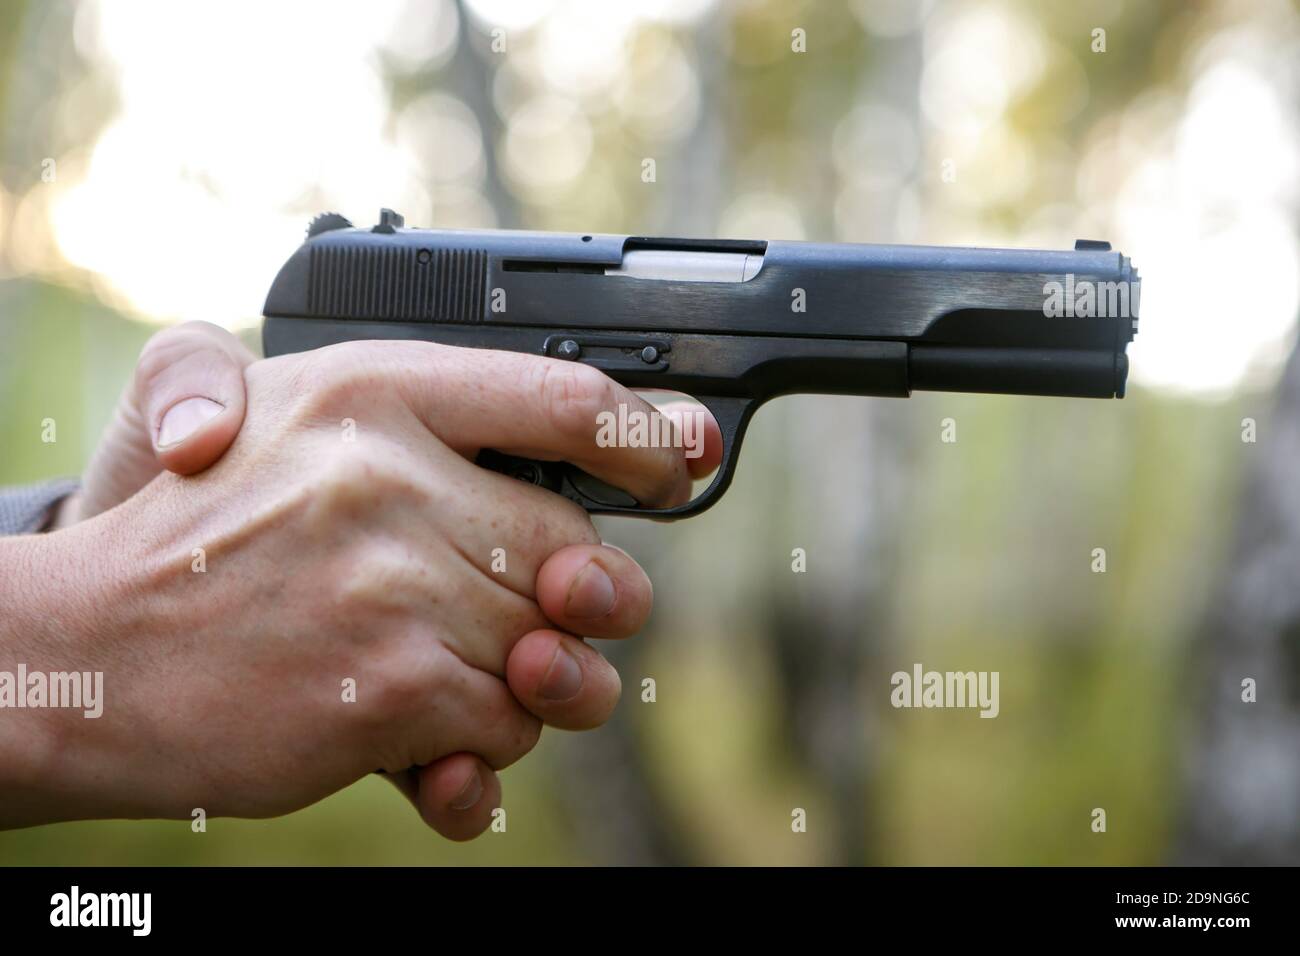 The shooter must aim the gun. Hands holding weapons Stock Photo